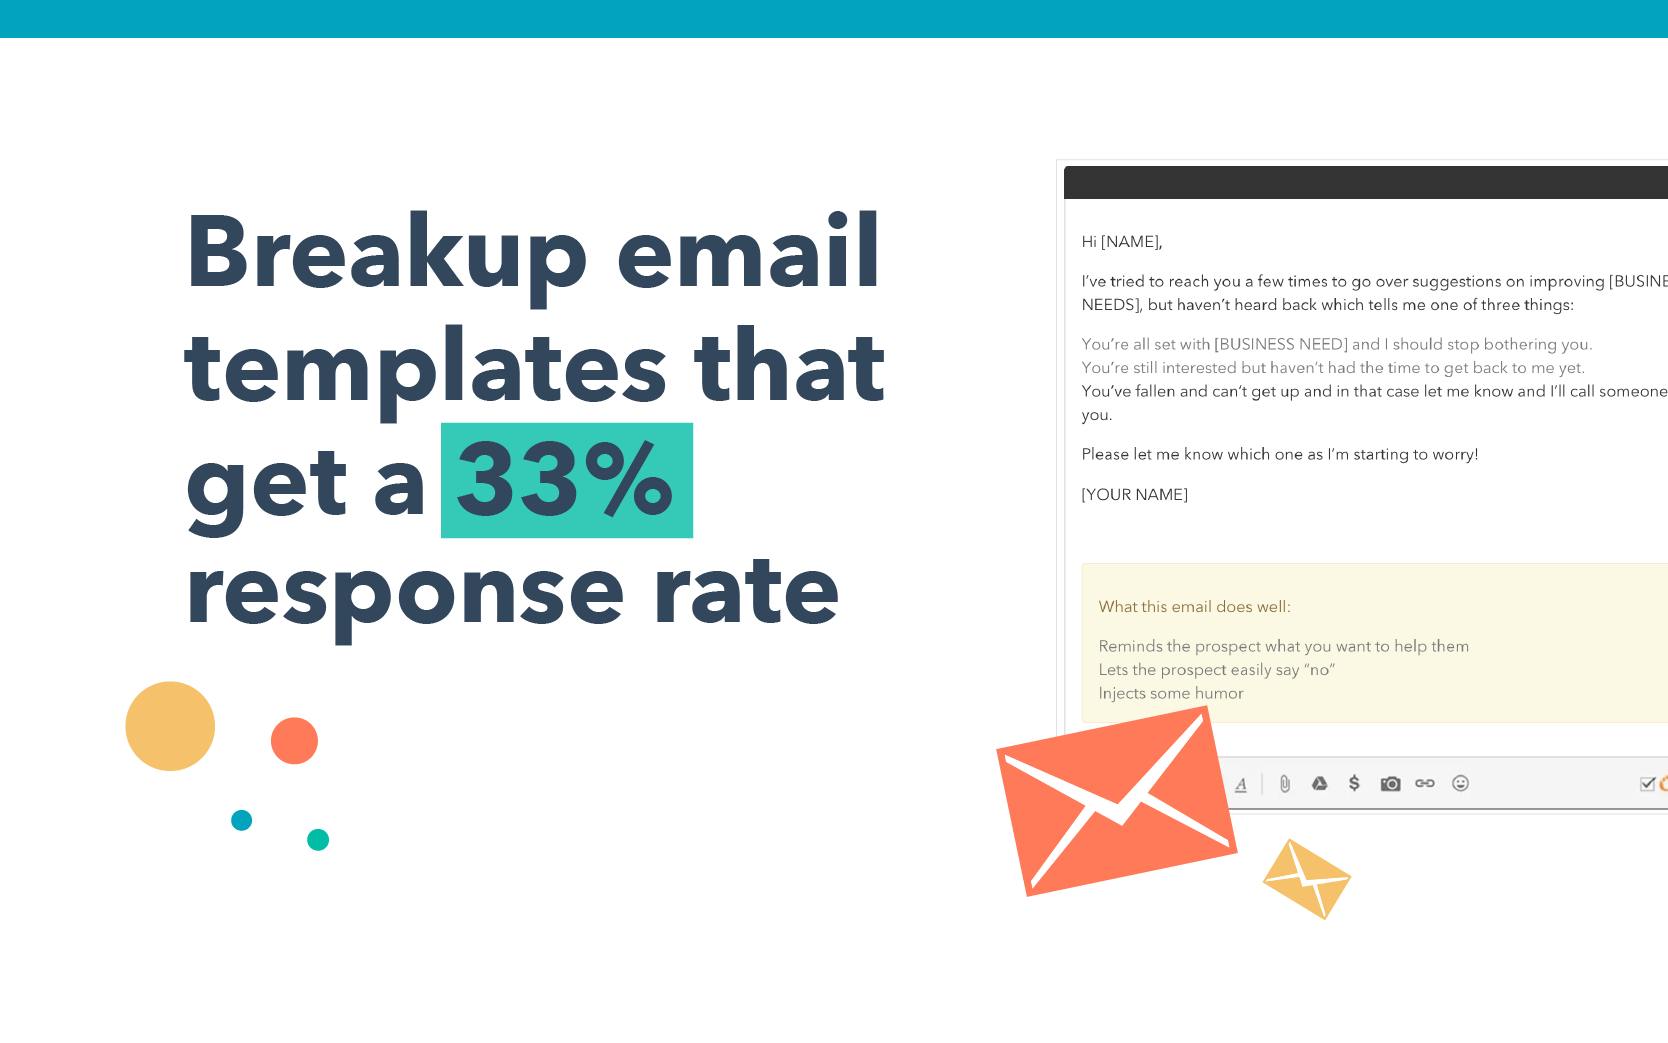 Breakup email templates that get a 33% response rate